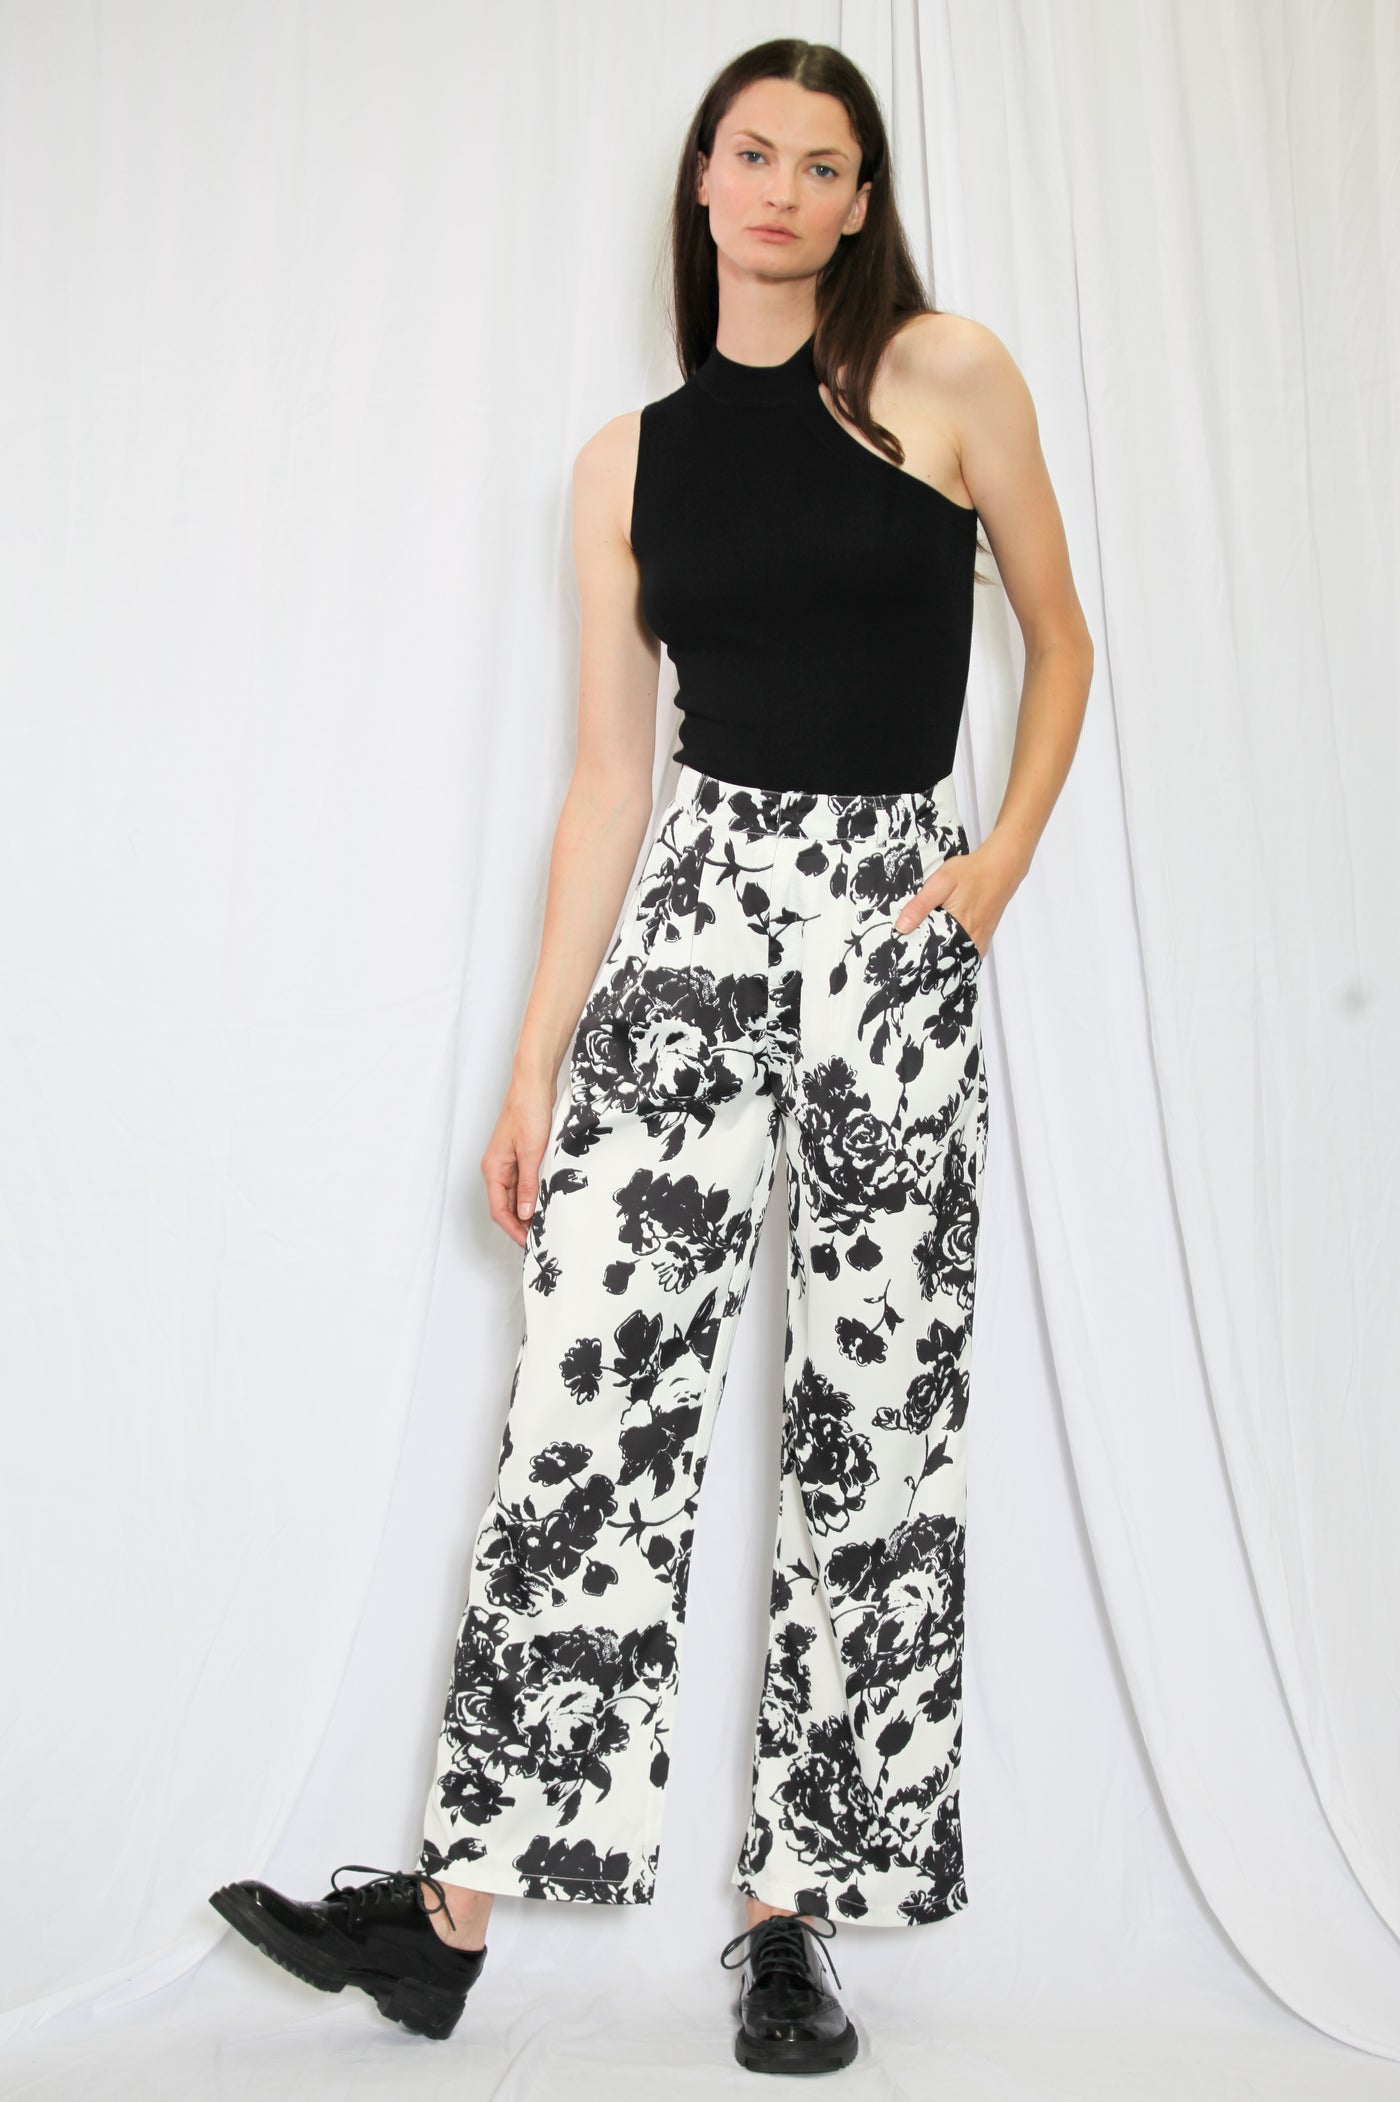 Silk Printed Black and White Floral Pants